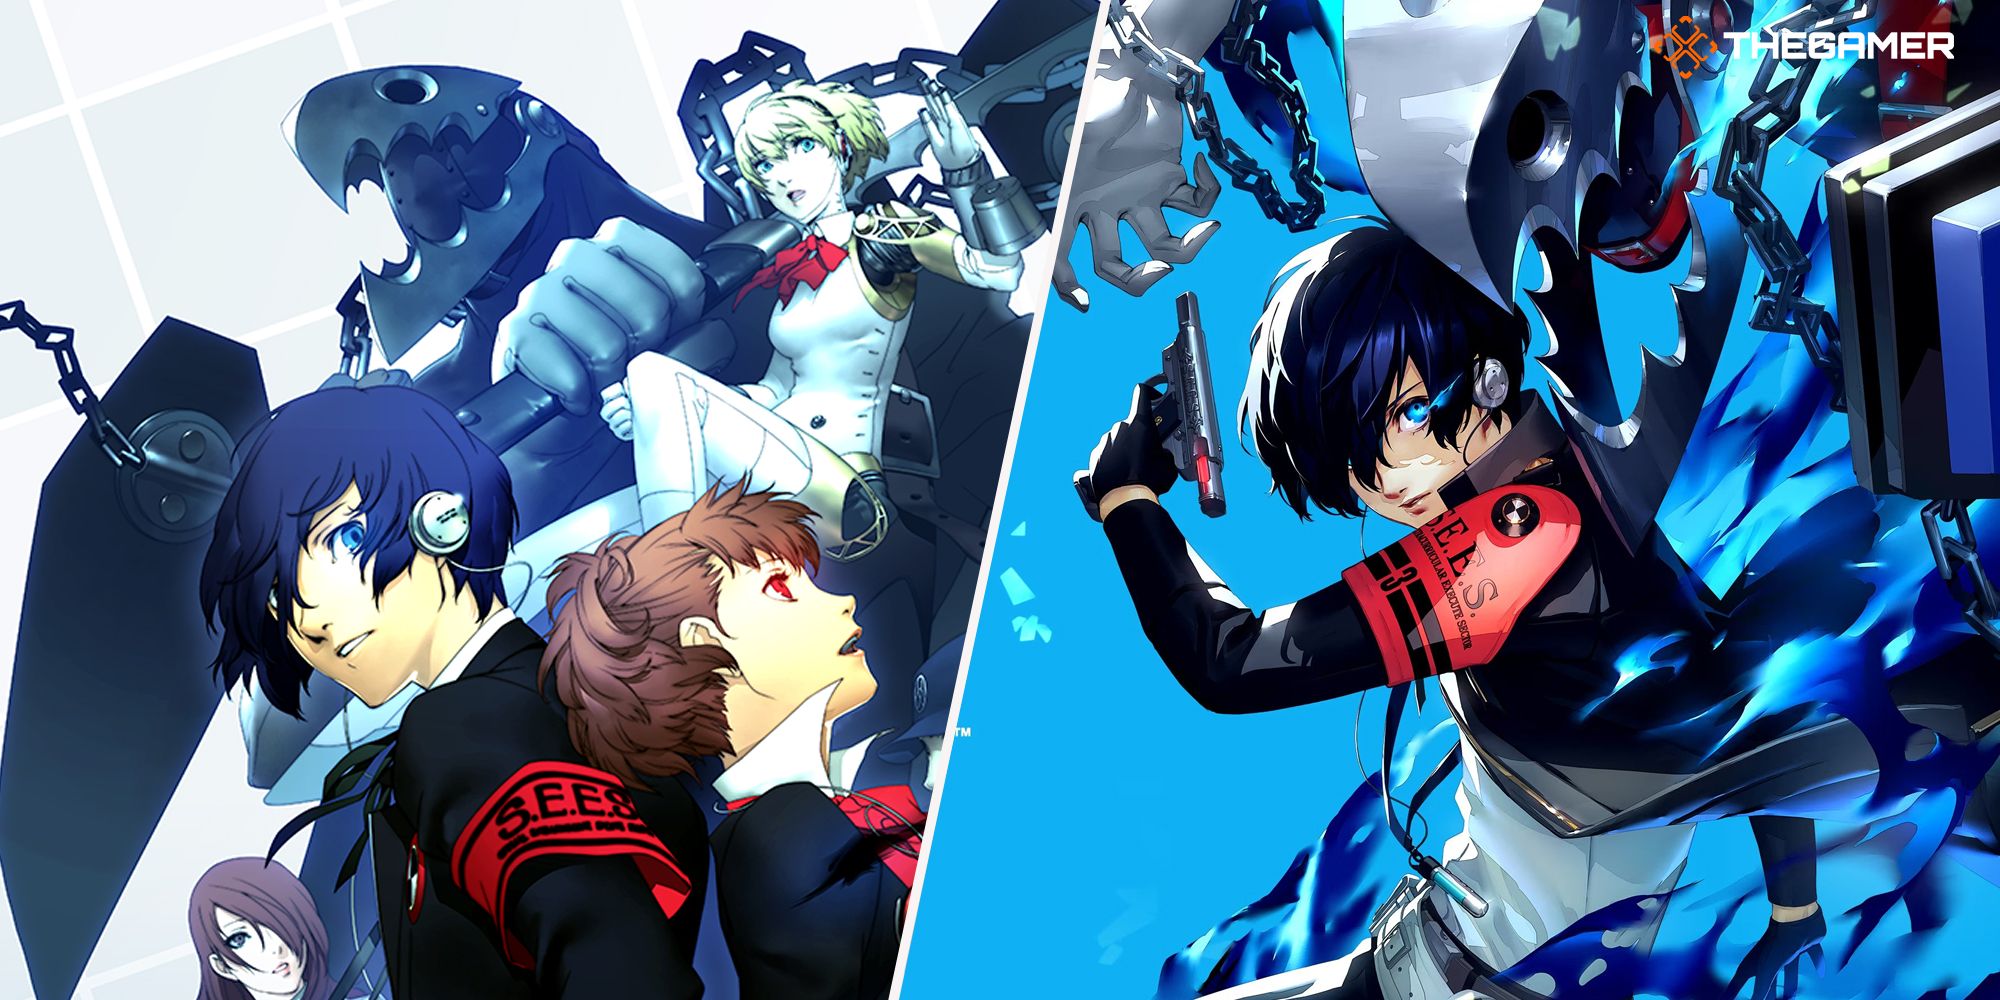 Persona 3 Portable review in progress: Roots of modern Persona start here -  Dexerto